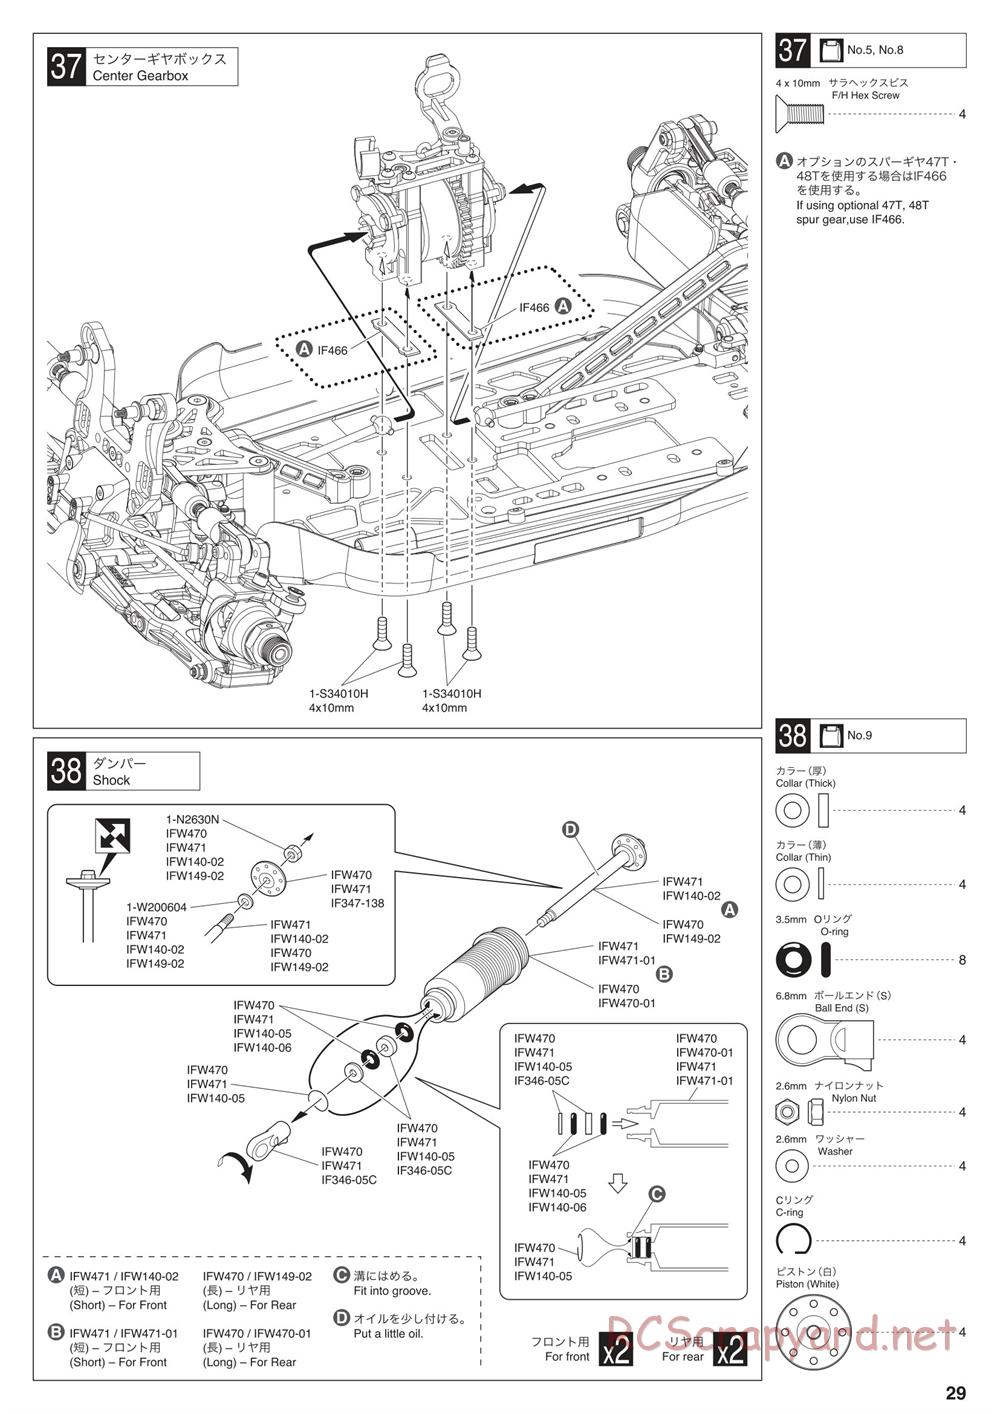 Kyosho - Inferno MP10 - Manual - Page 29